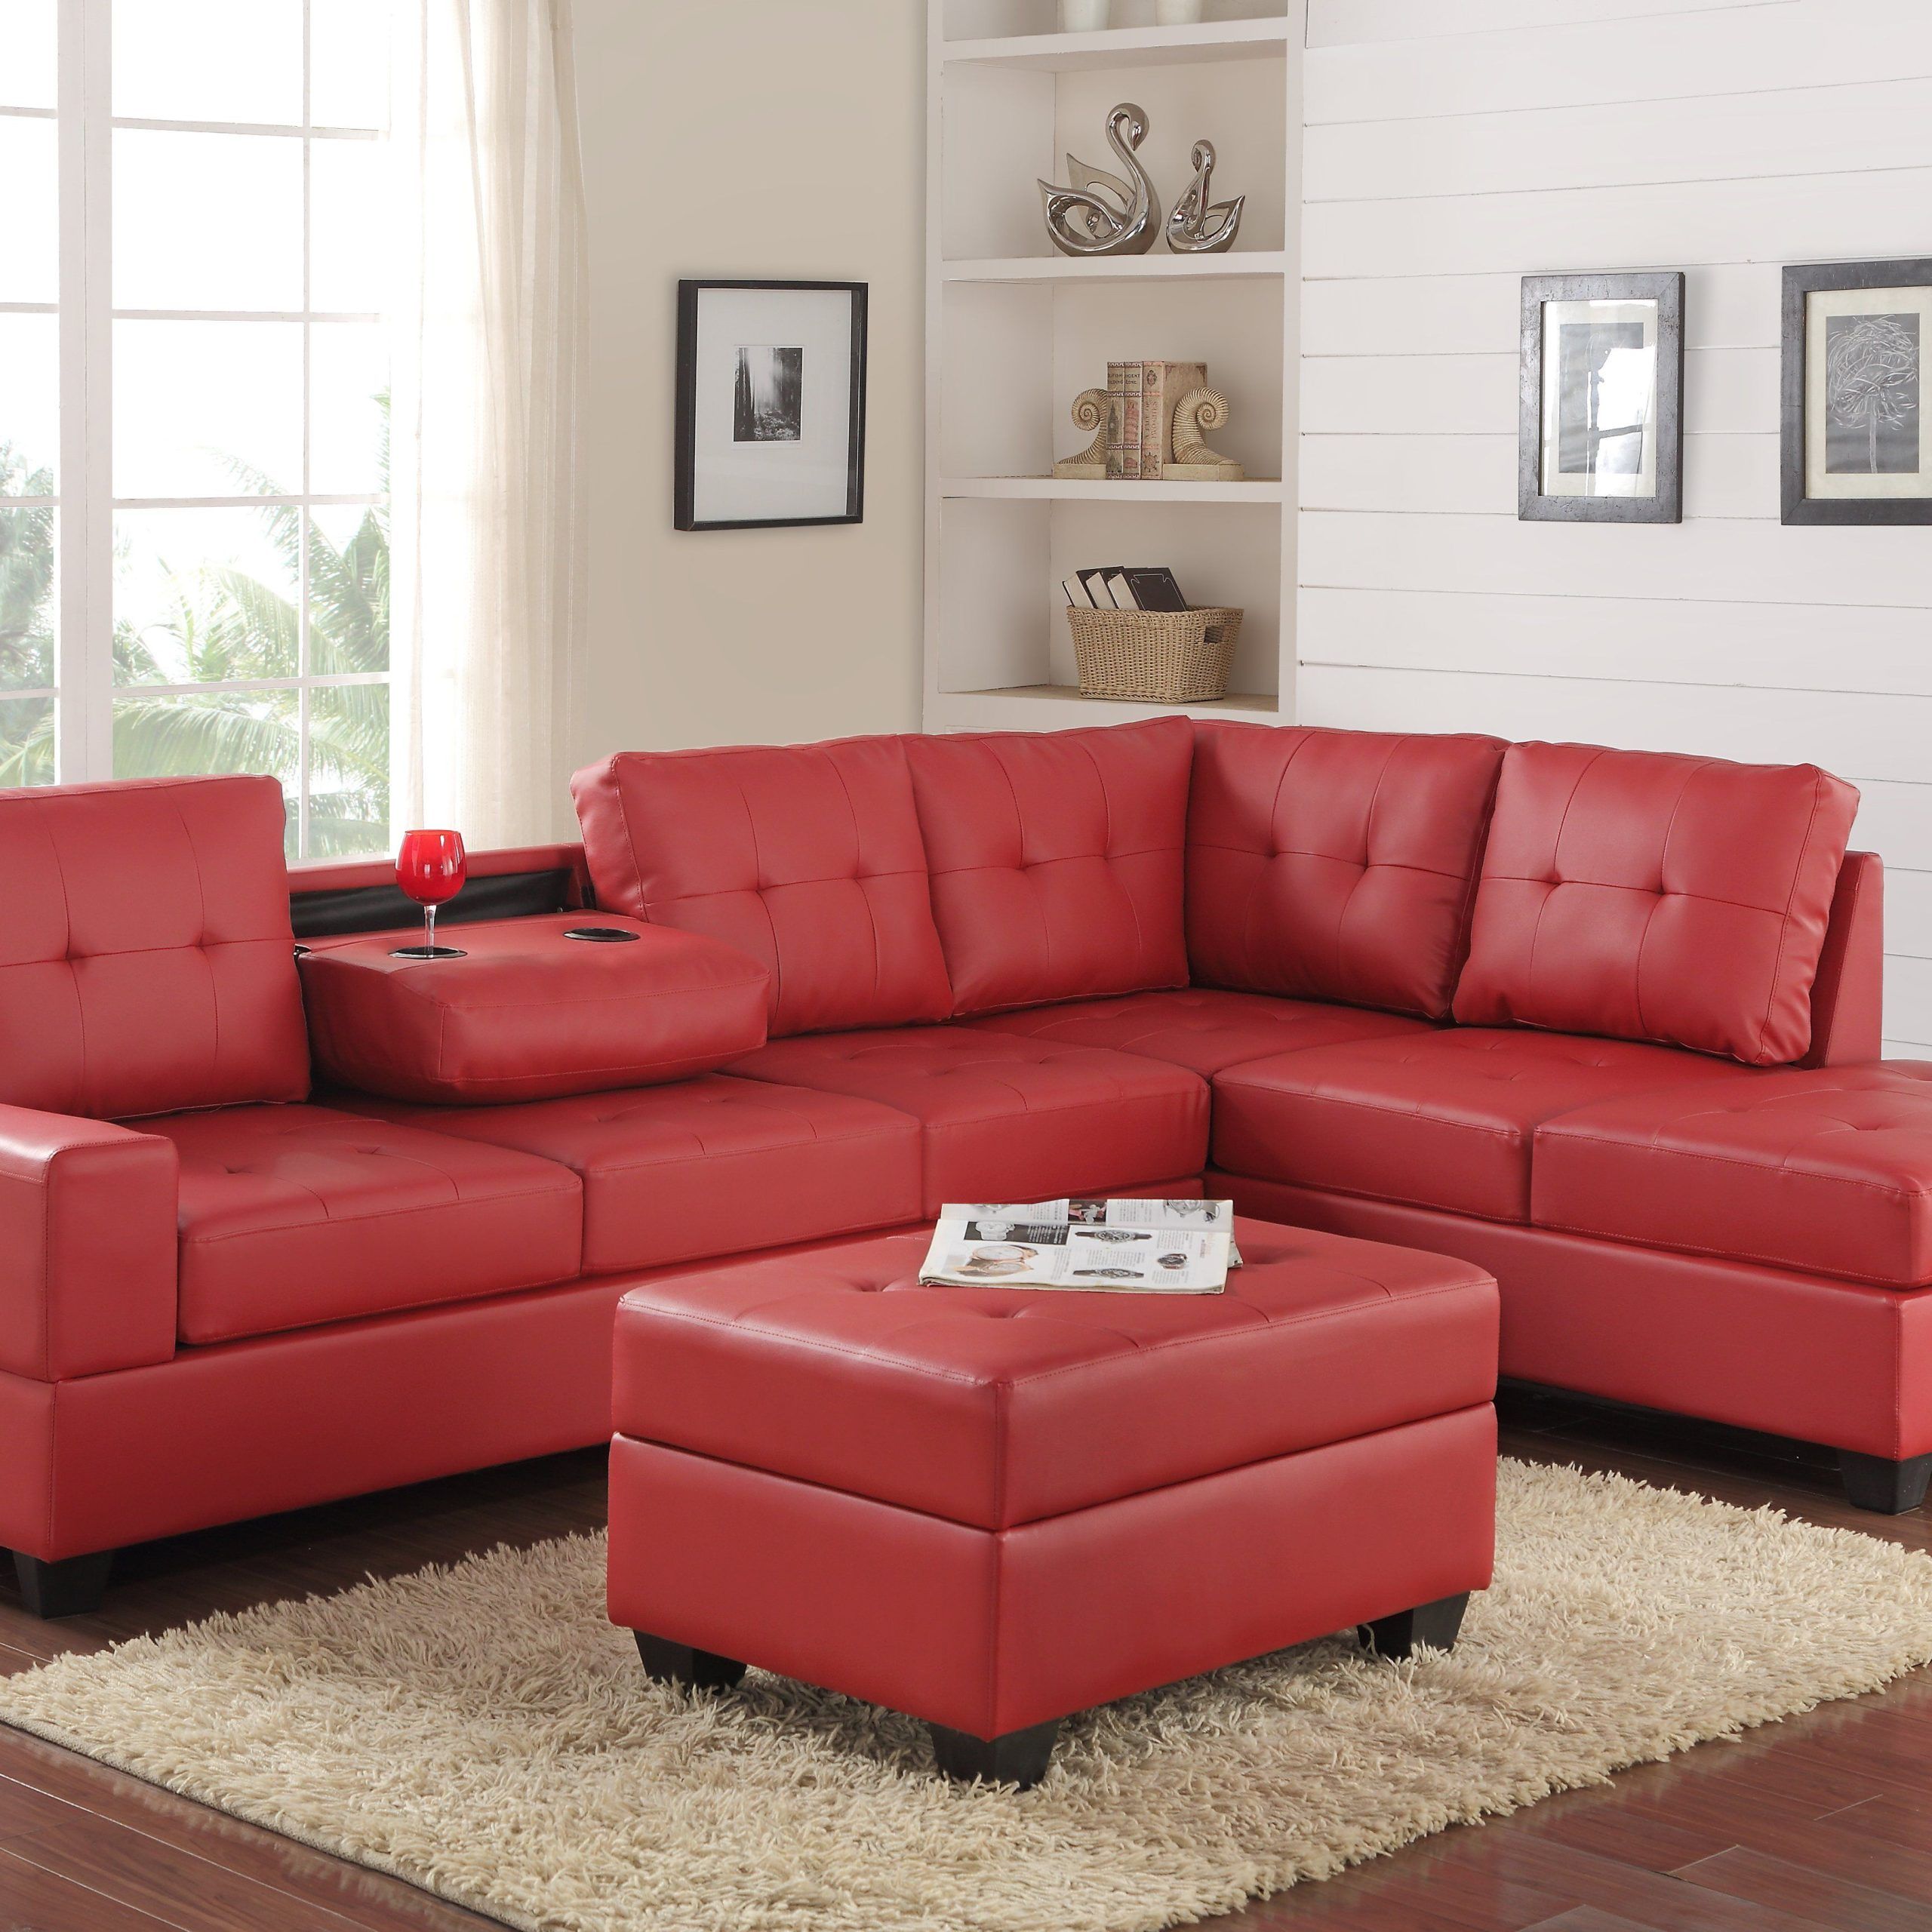 Heights Faux Leather Reversible Sectional With Storage Ottoman With Regard To Faux Leather Sectional Sofa Sets (View 9 of 21)